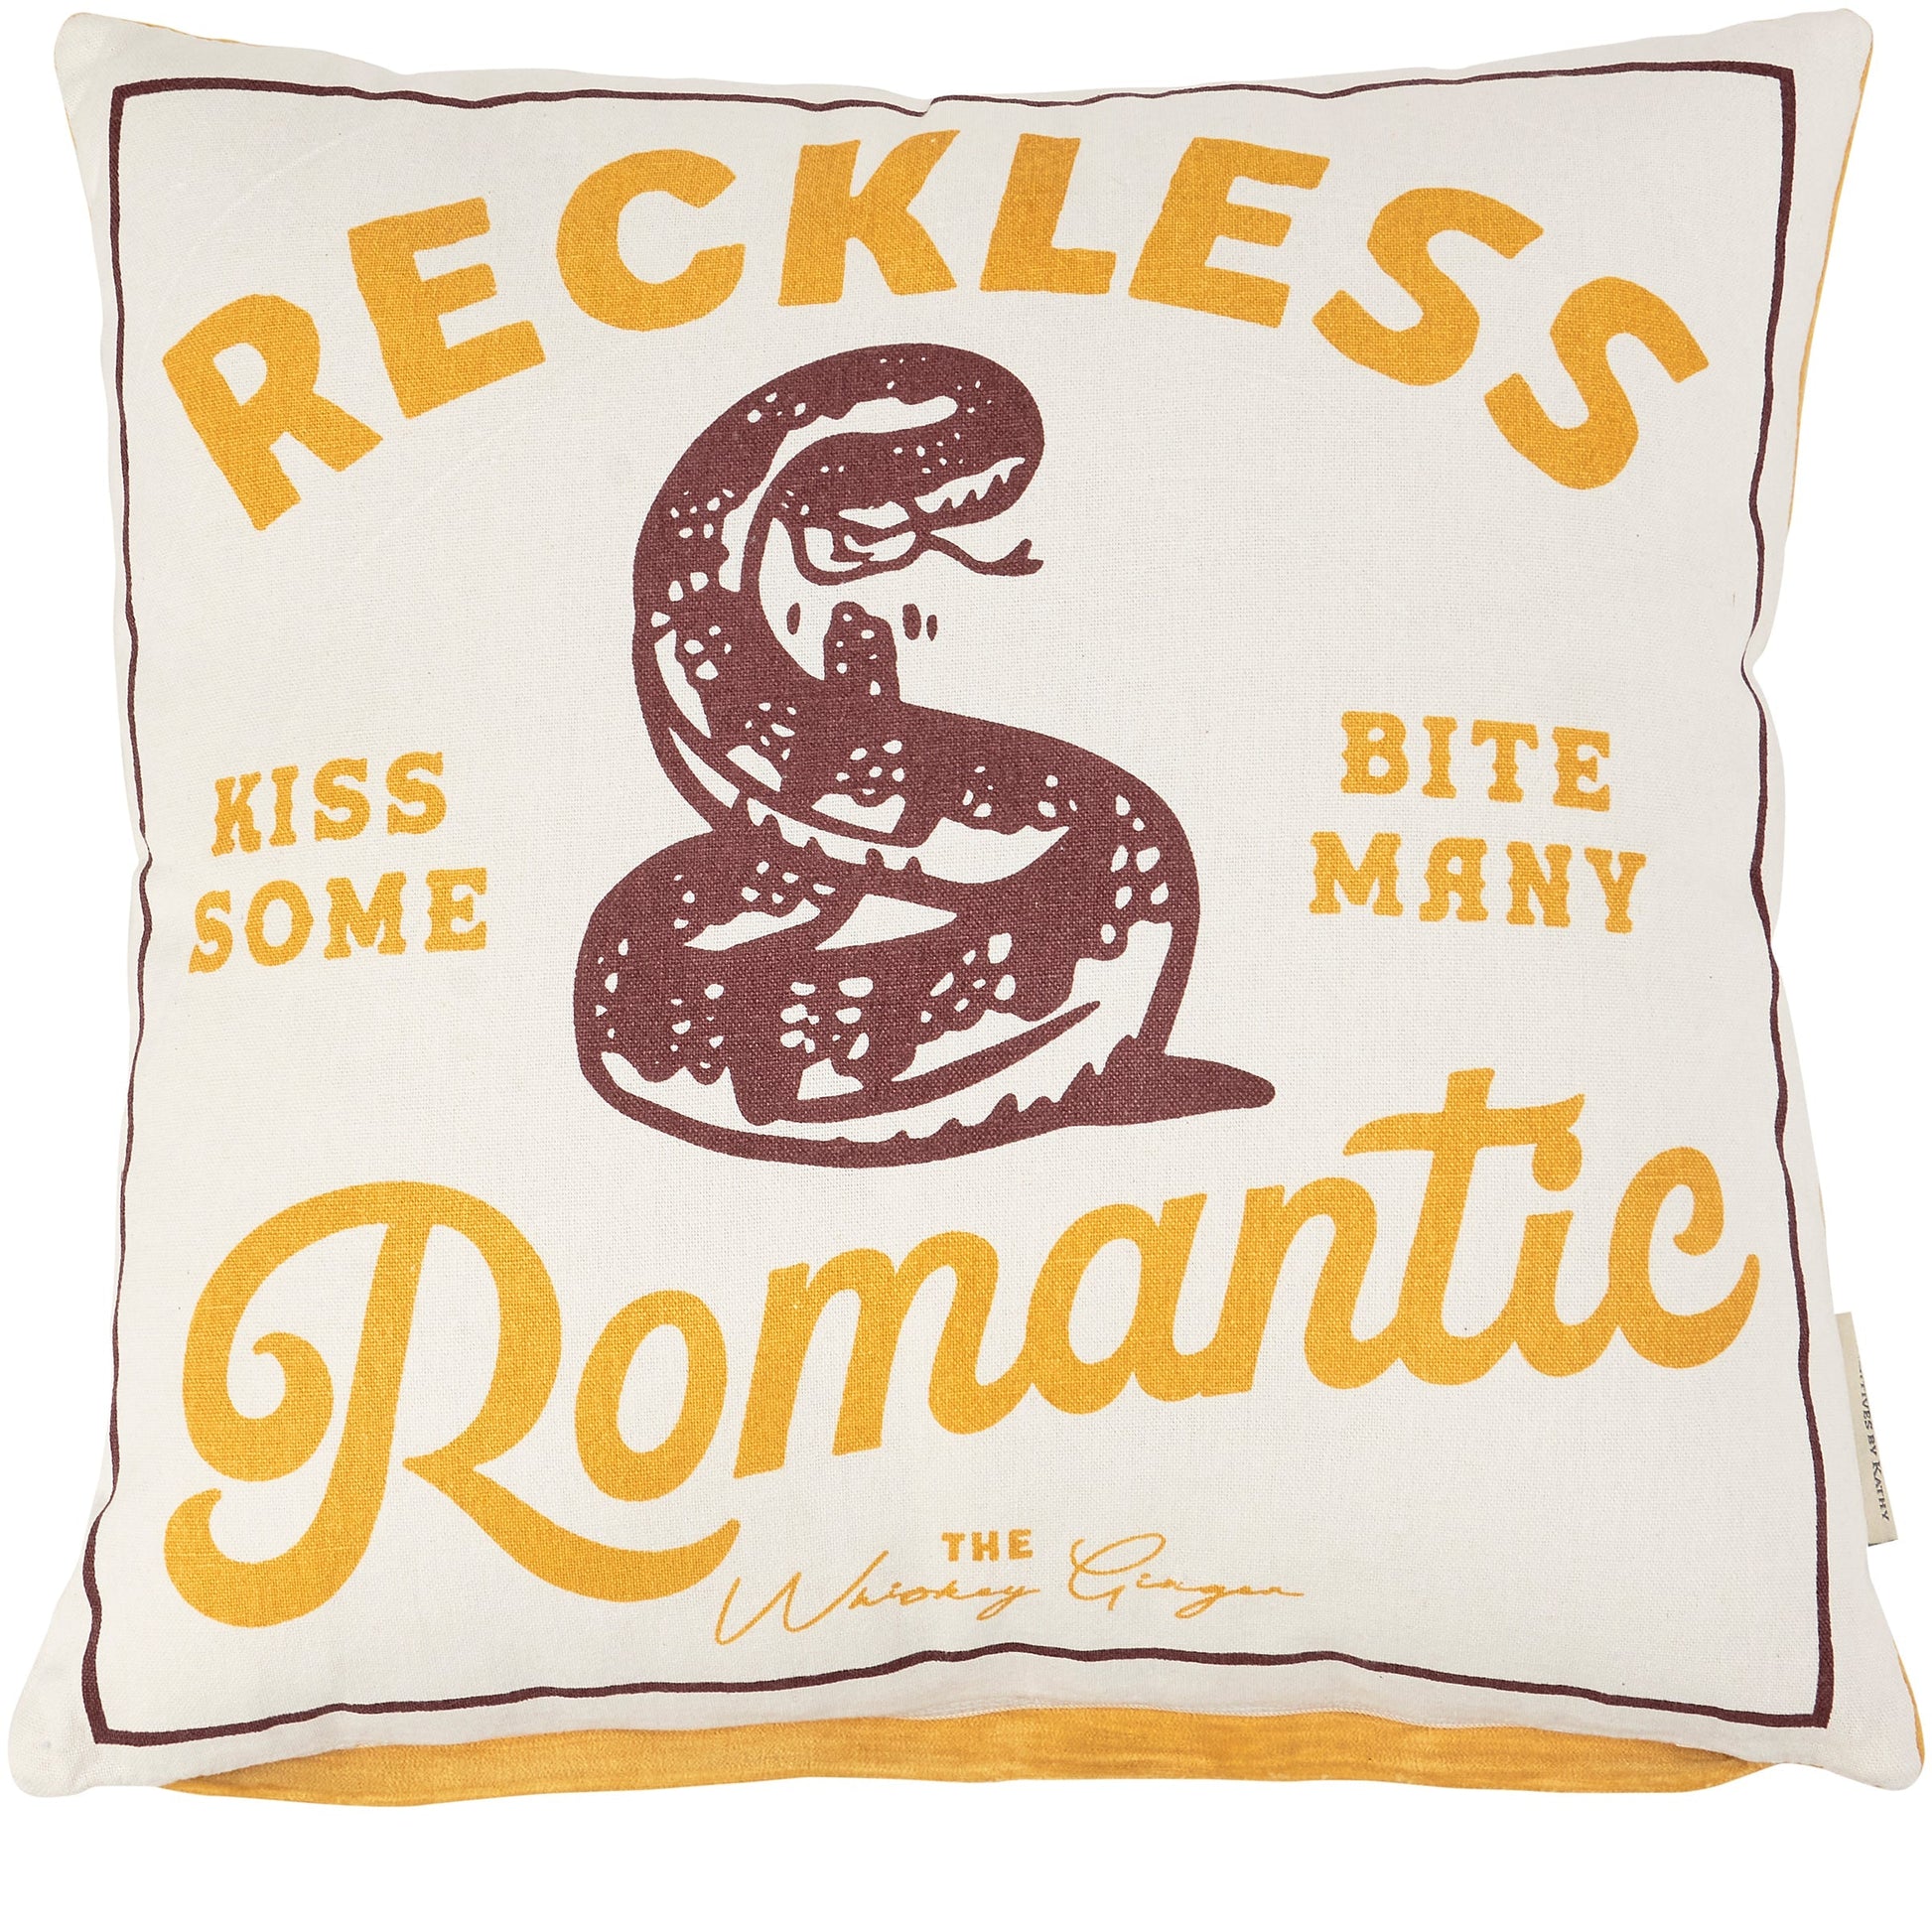 Reckless Romantic Kiss Some Bite Many Rattlesnake Throw Pillow | Western Themed Cushion | 16" x 16"